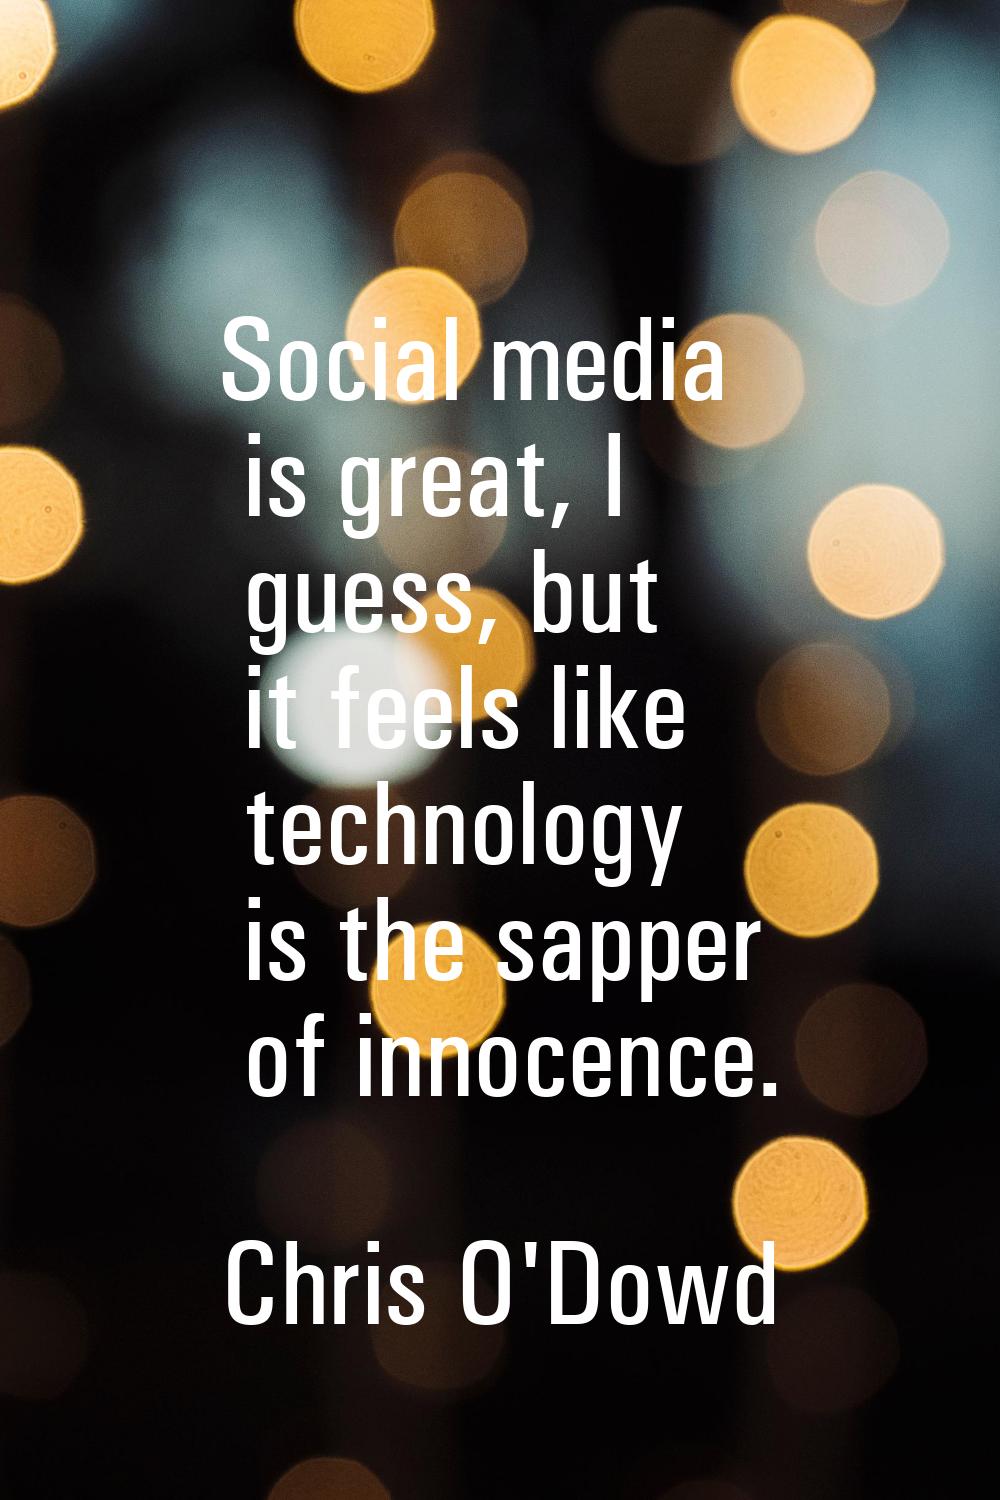 Social media is great, I guess, but it feels like technology is the sapper of innocence.